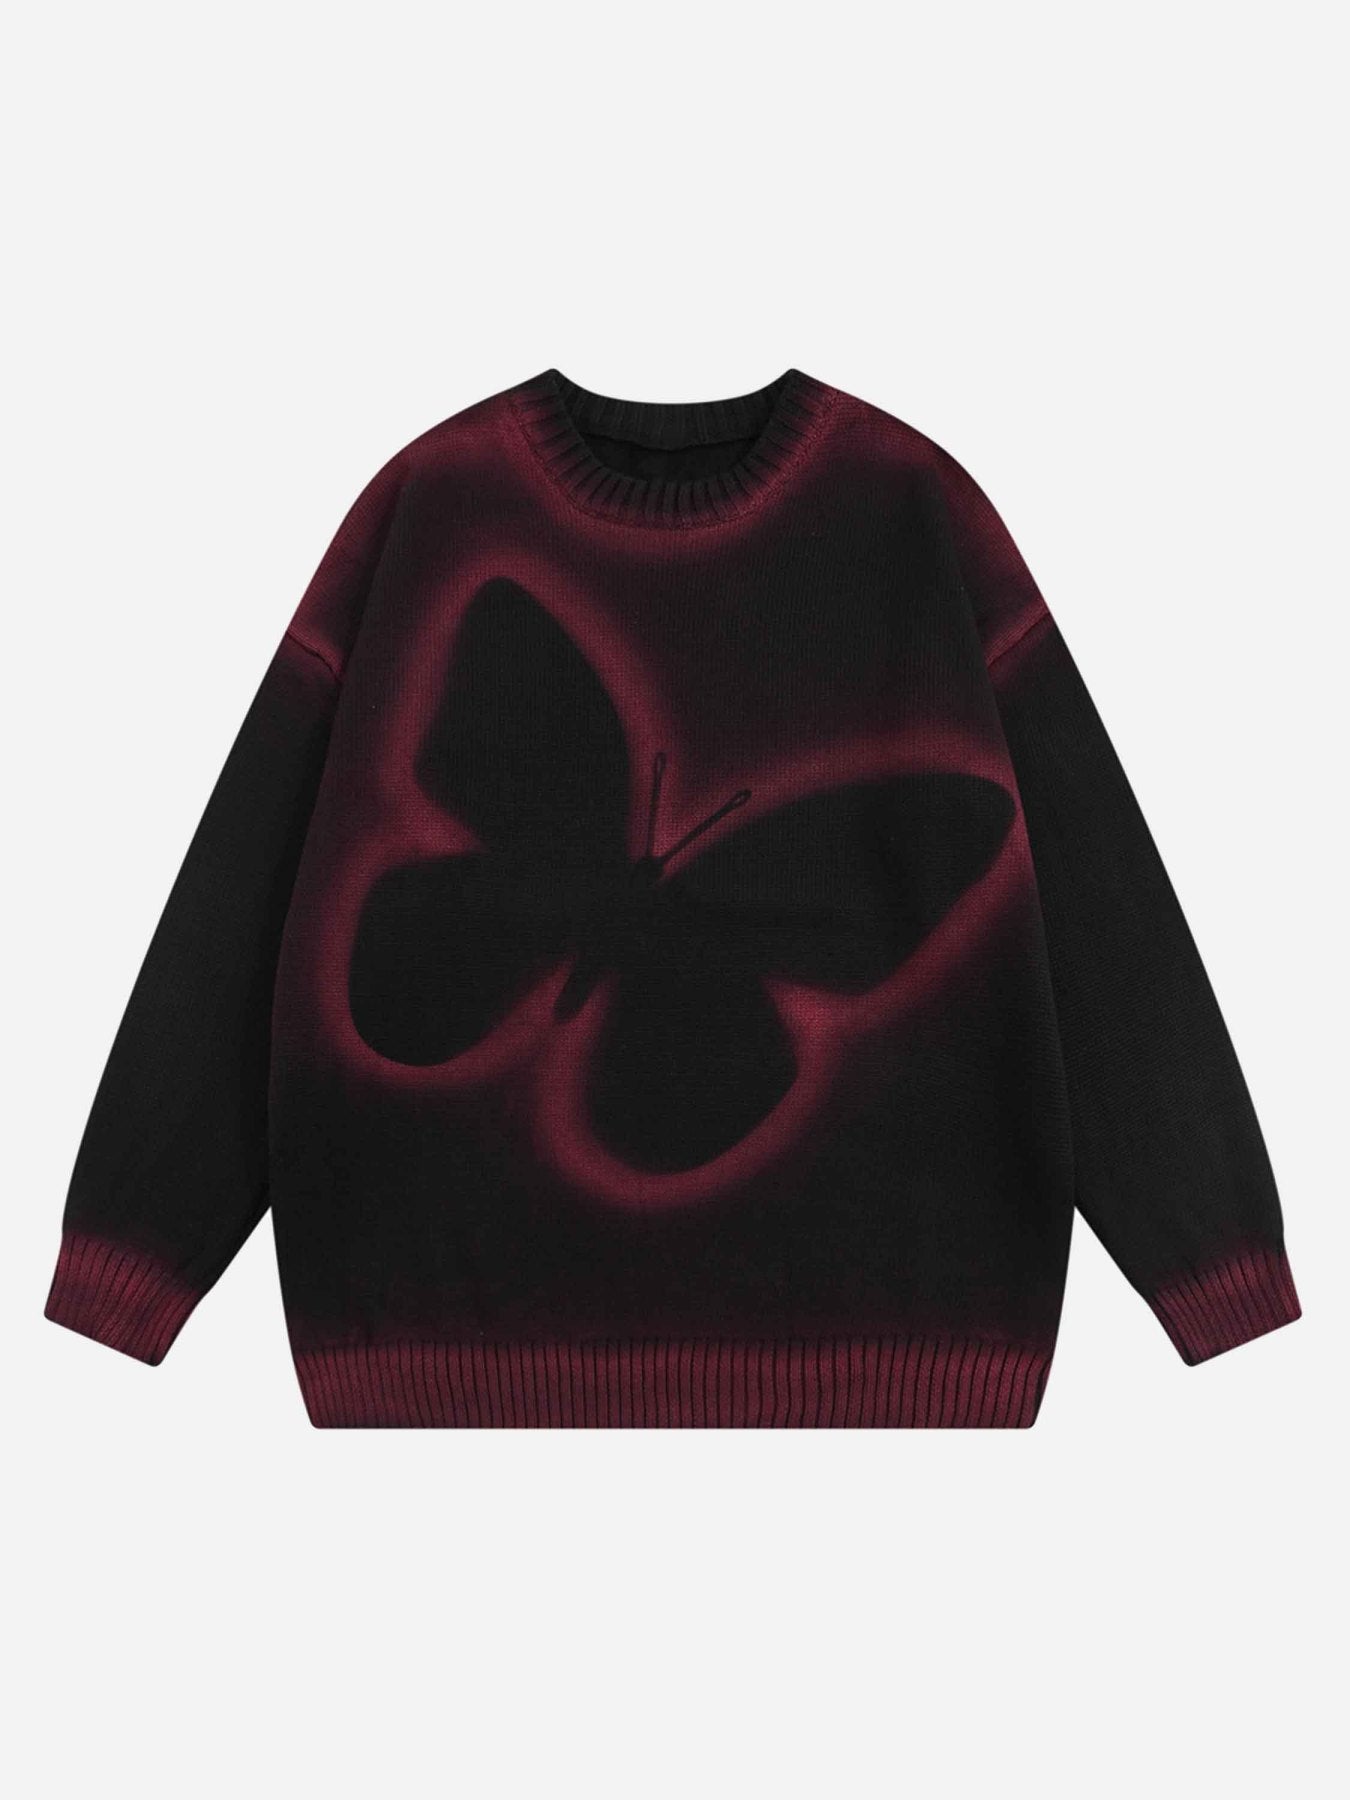 The Supermade Butterfly Airbrush Graffiti Sweater